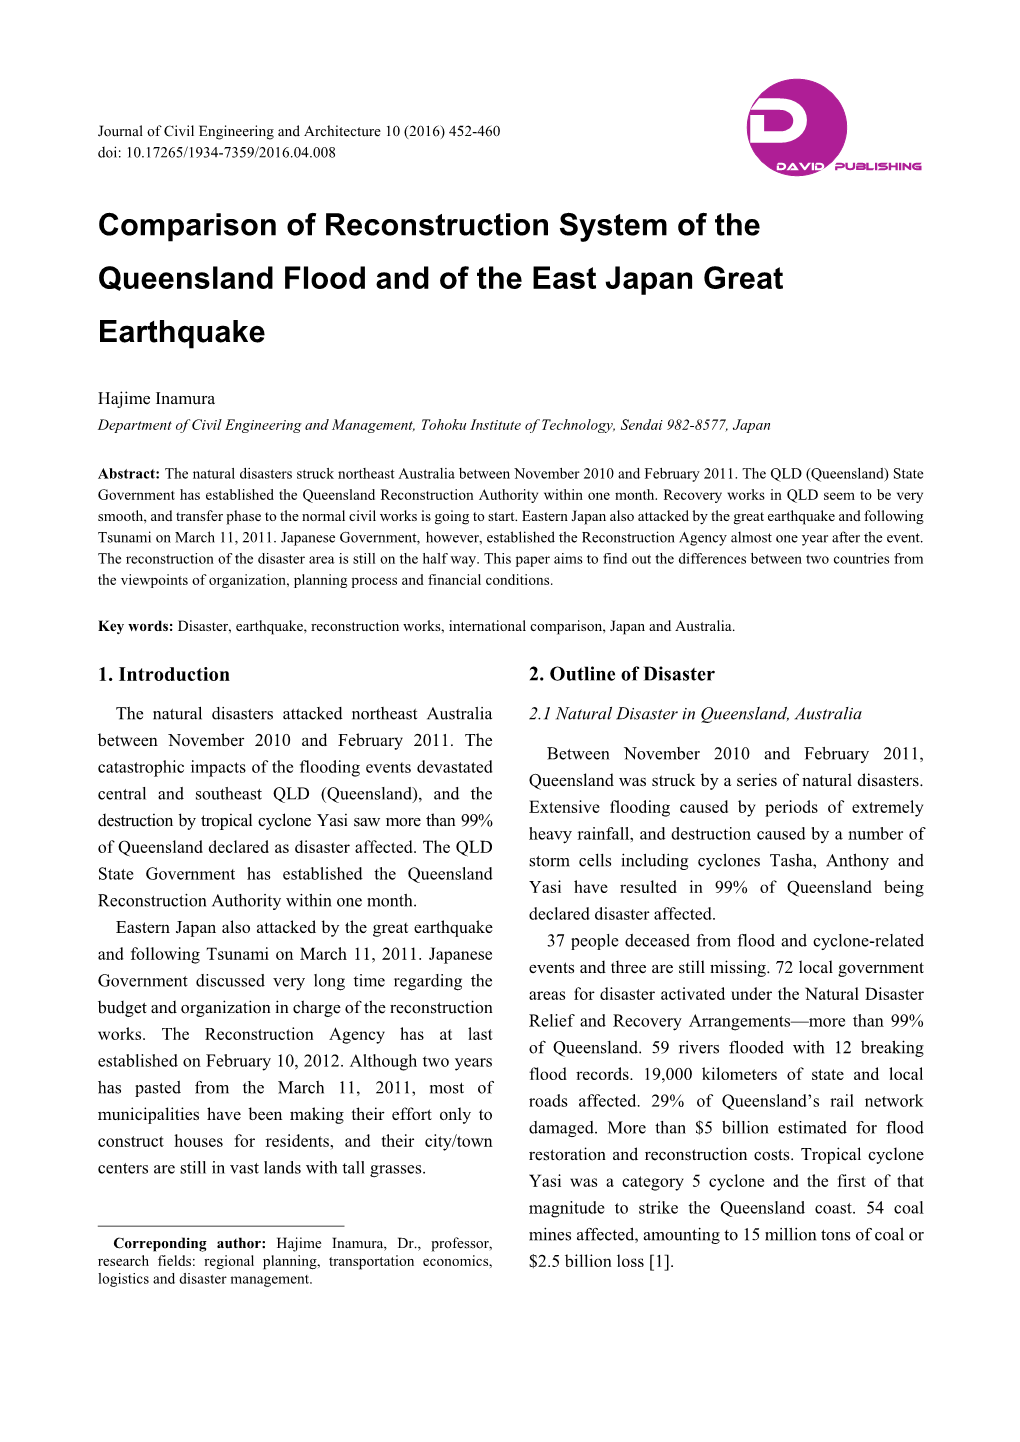 Comparison of Reconstruction System of the Queensland Flood and of the East Japan Great Earthquake